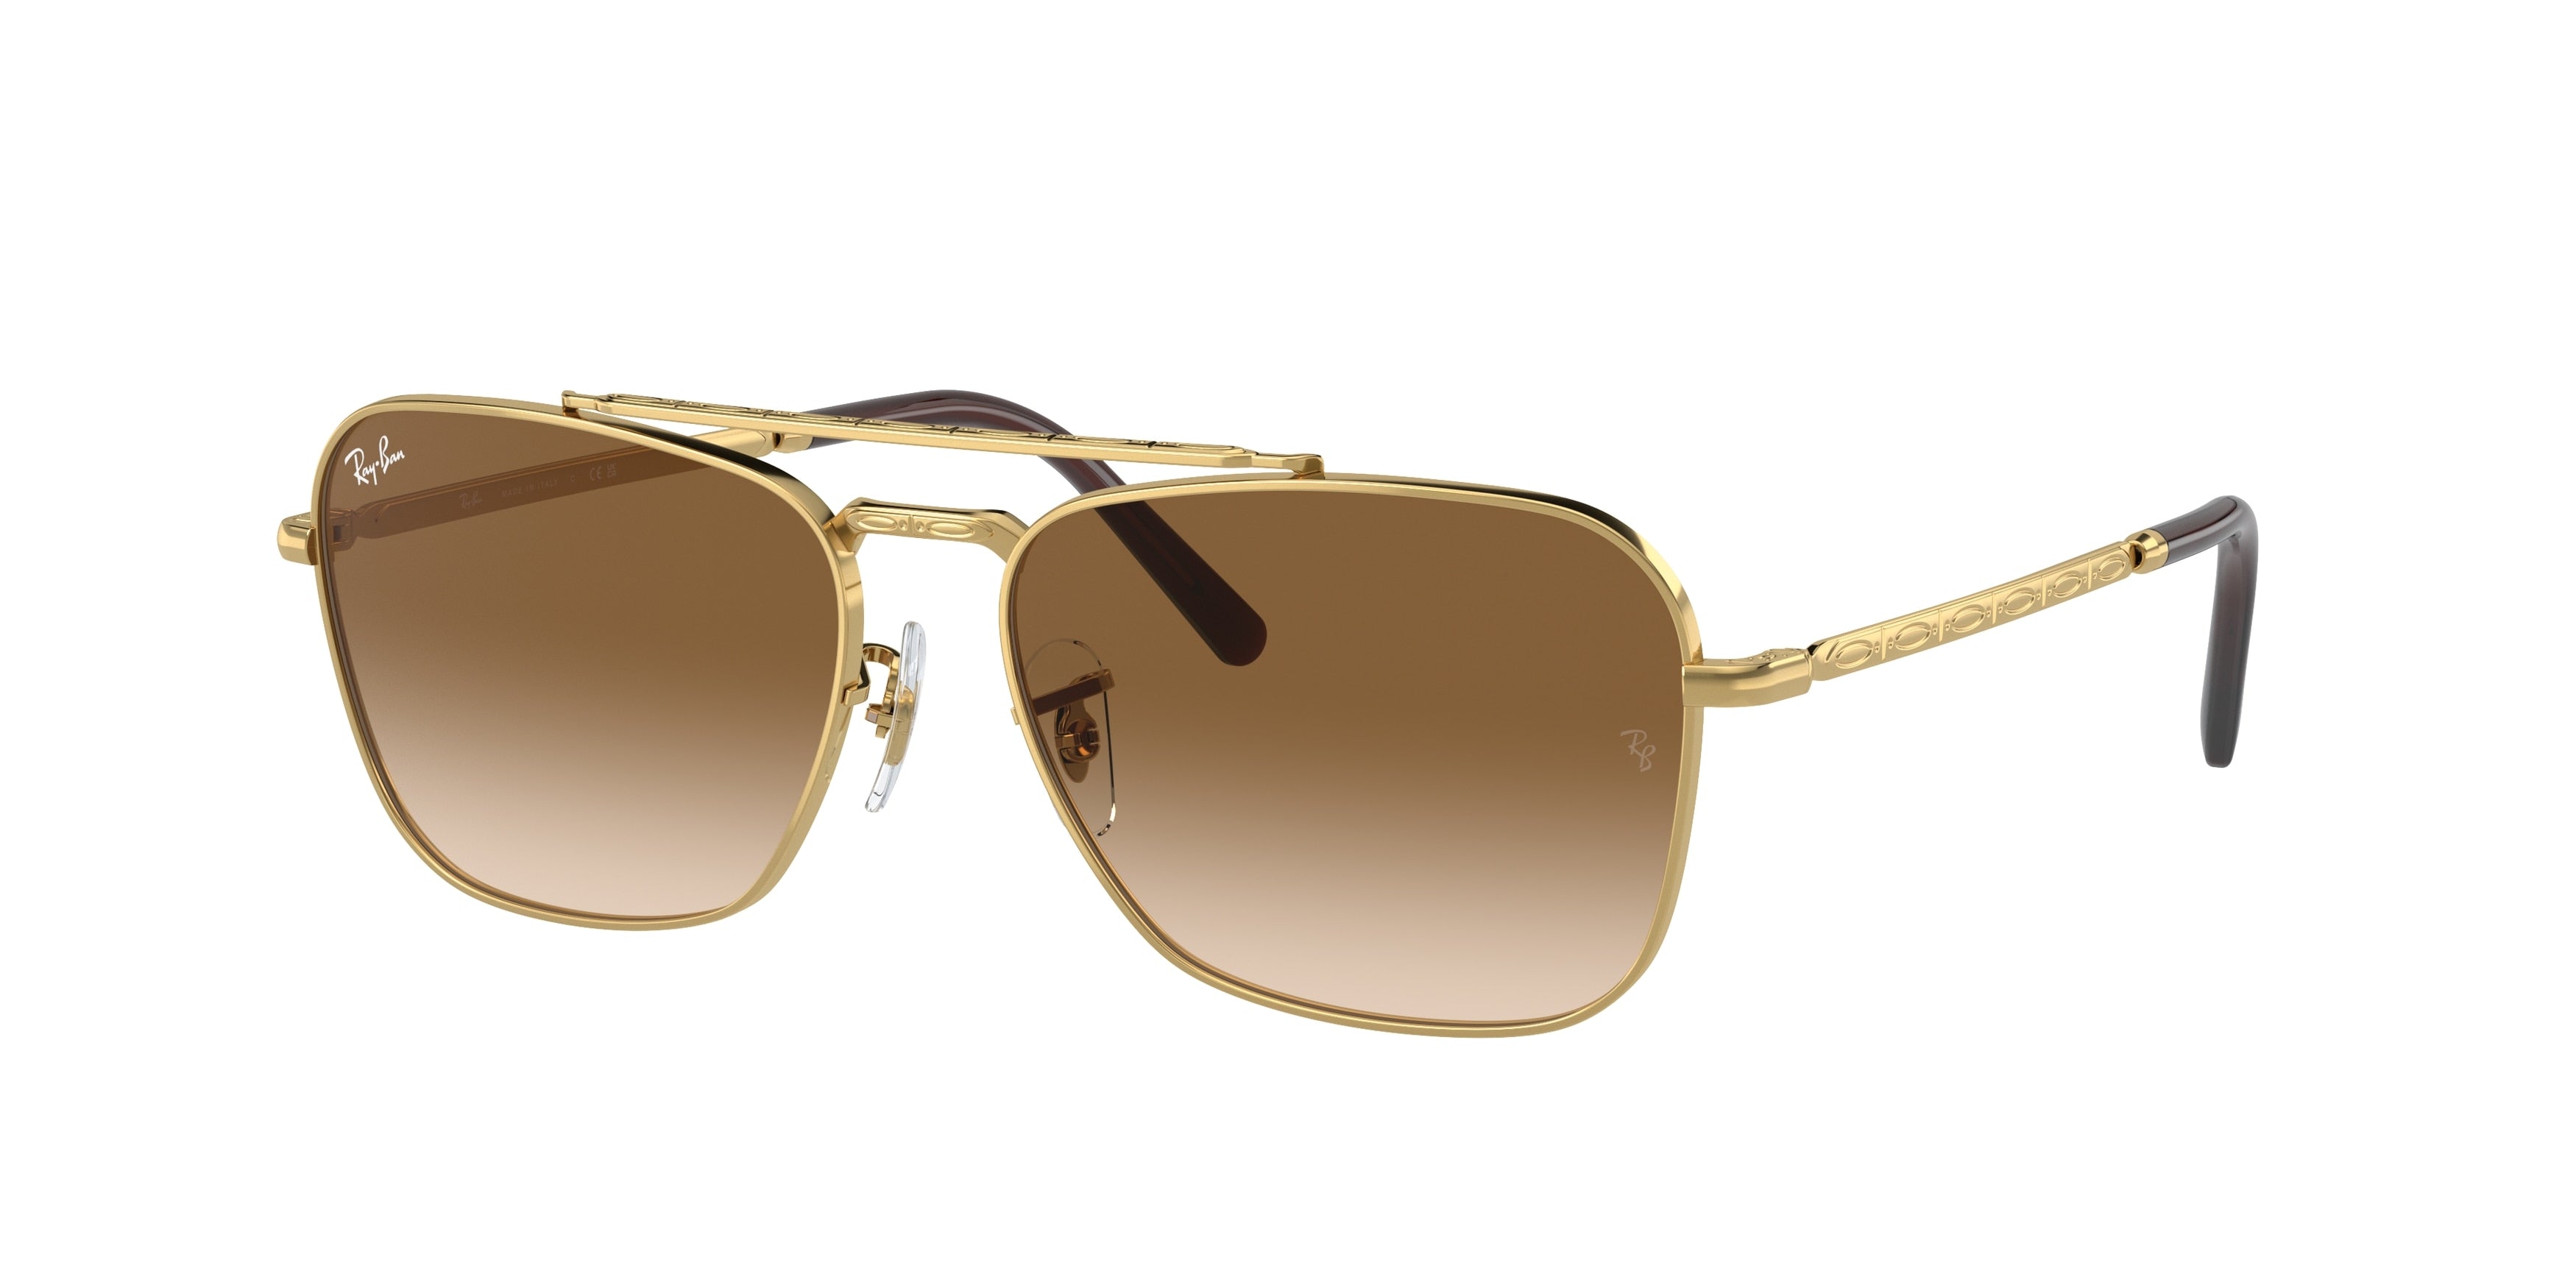 Ray-Ban NEW CARAVAN RB3636 Square Sunglasses  001/51-Gold 57-140-15 - Color Map Gold